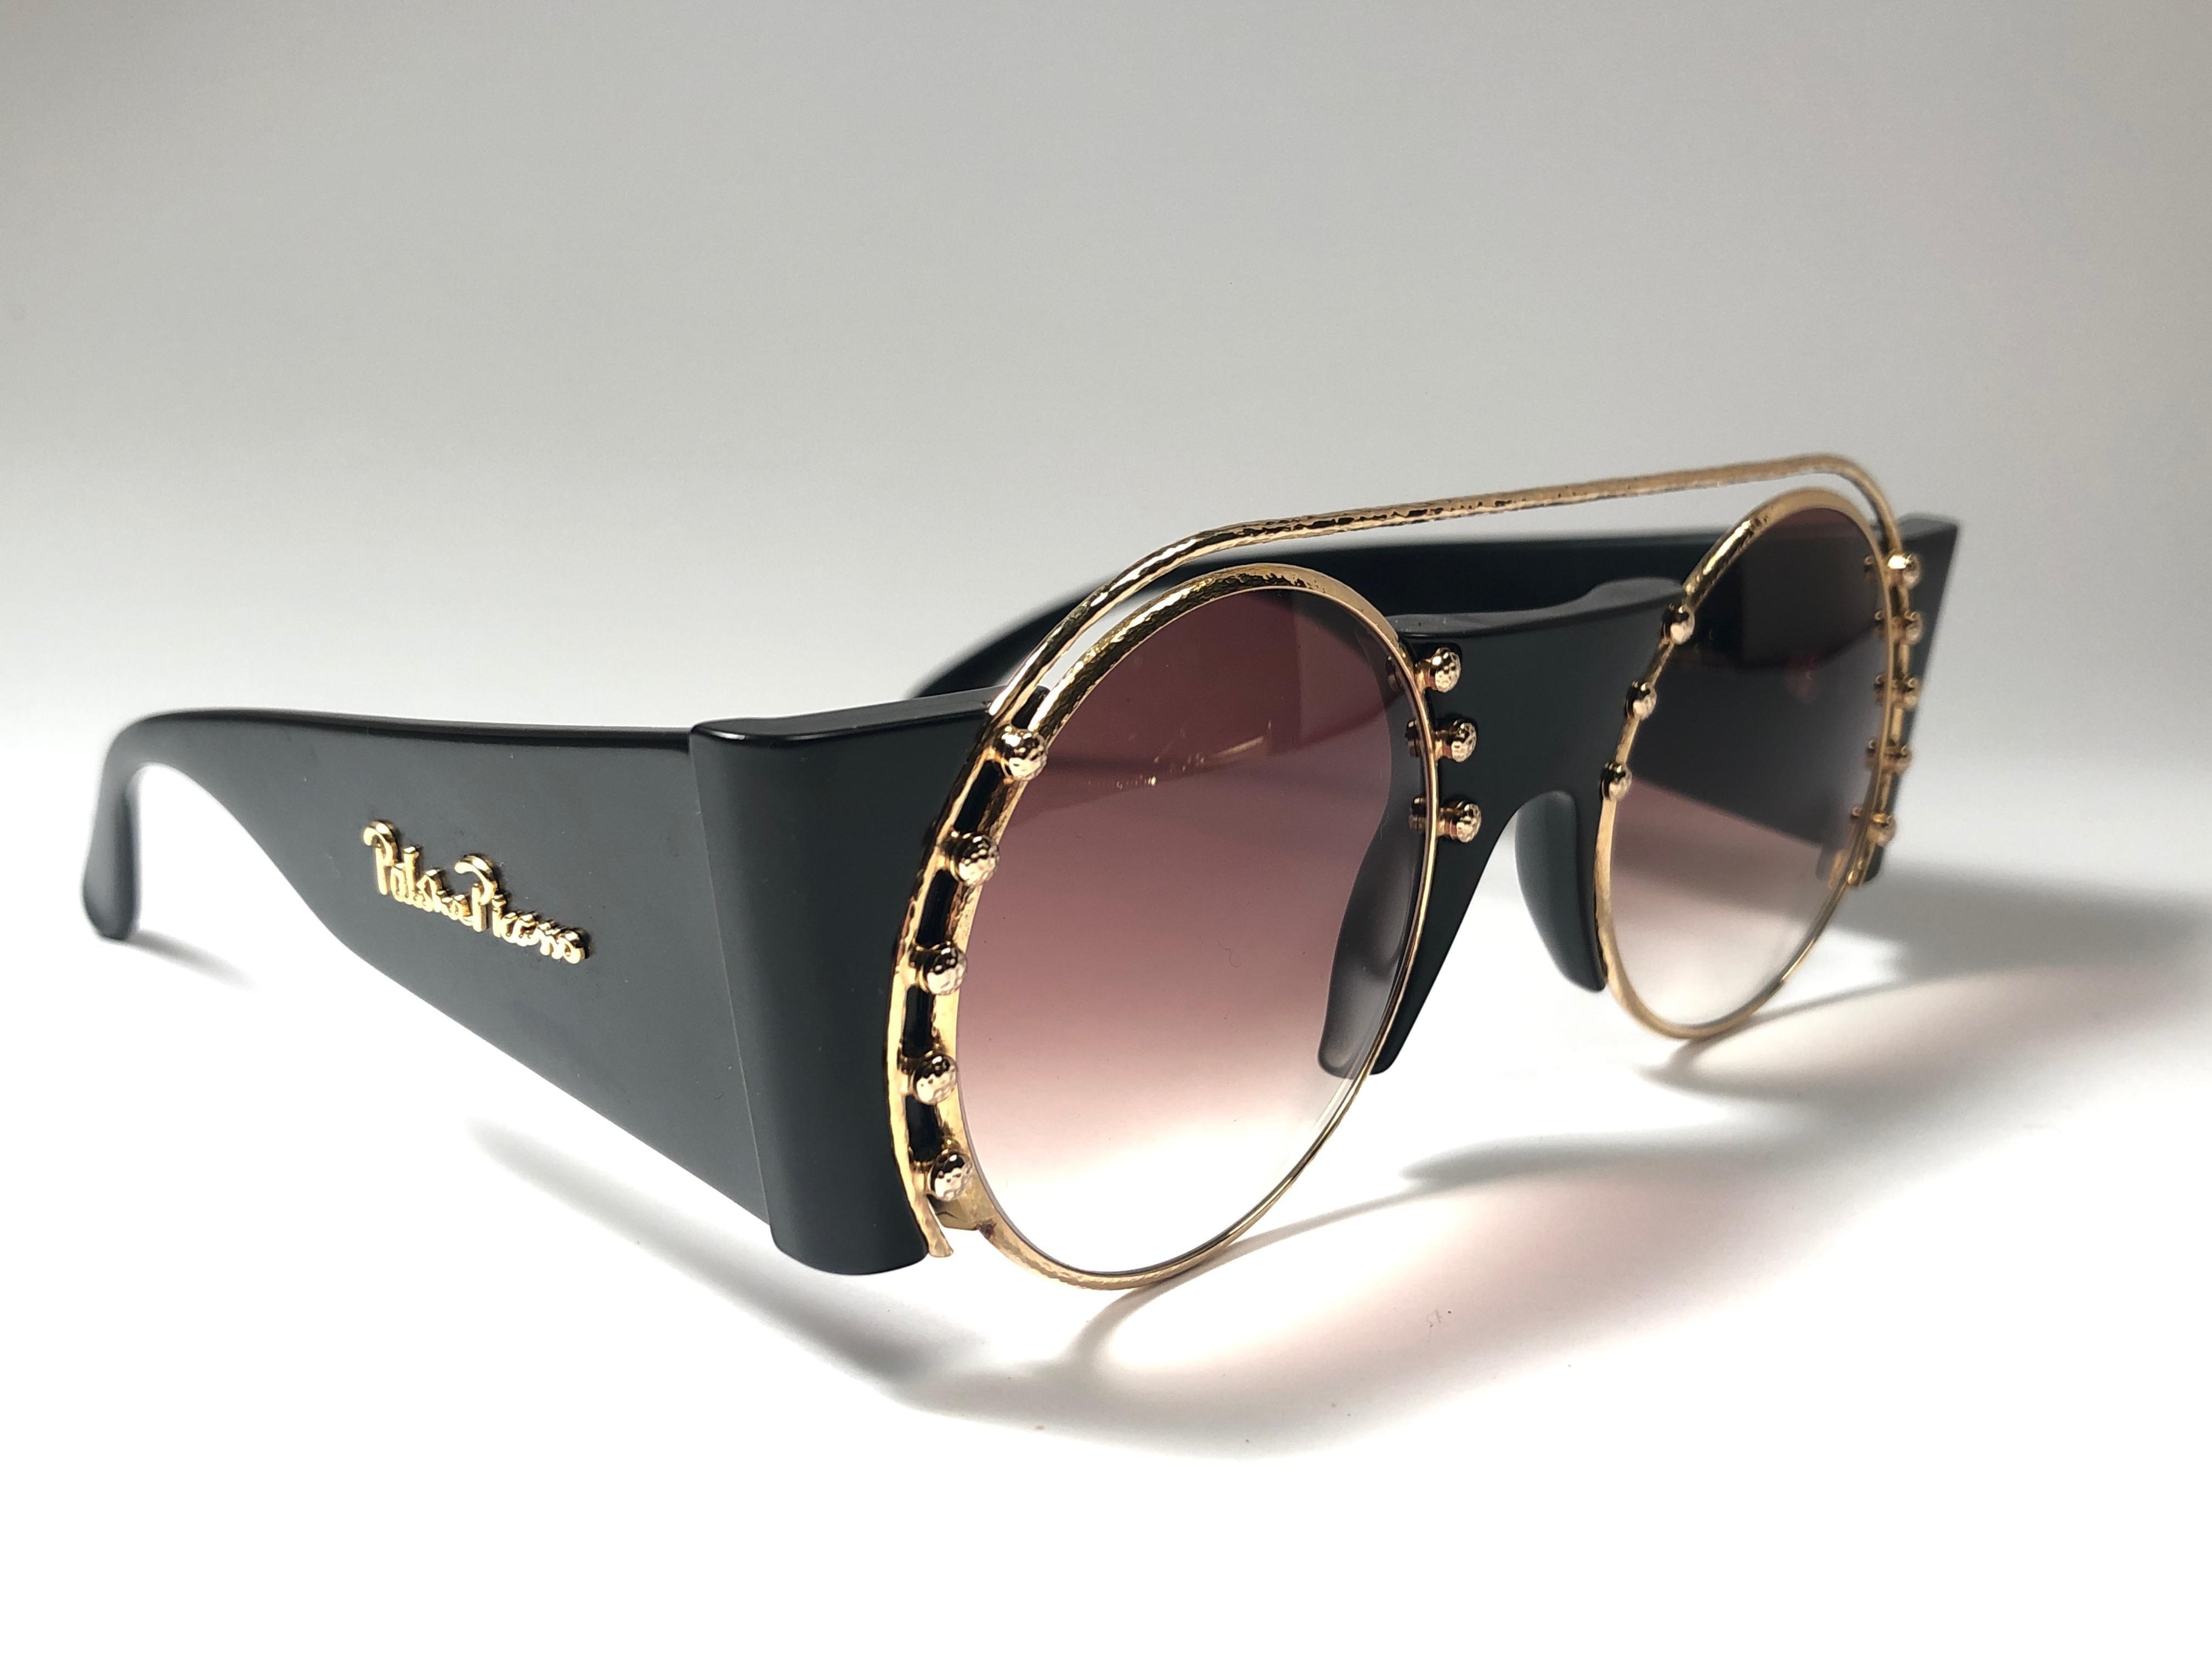 New Vintage Paloma Picasso black and gold frame with strass details sunglasses.

Made in Germany 1980's. 

Frame with minor wear and tarnish due to storage. 

Made in Germany.